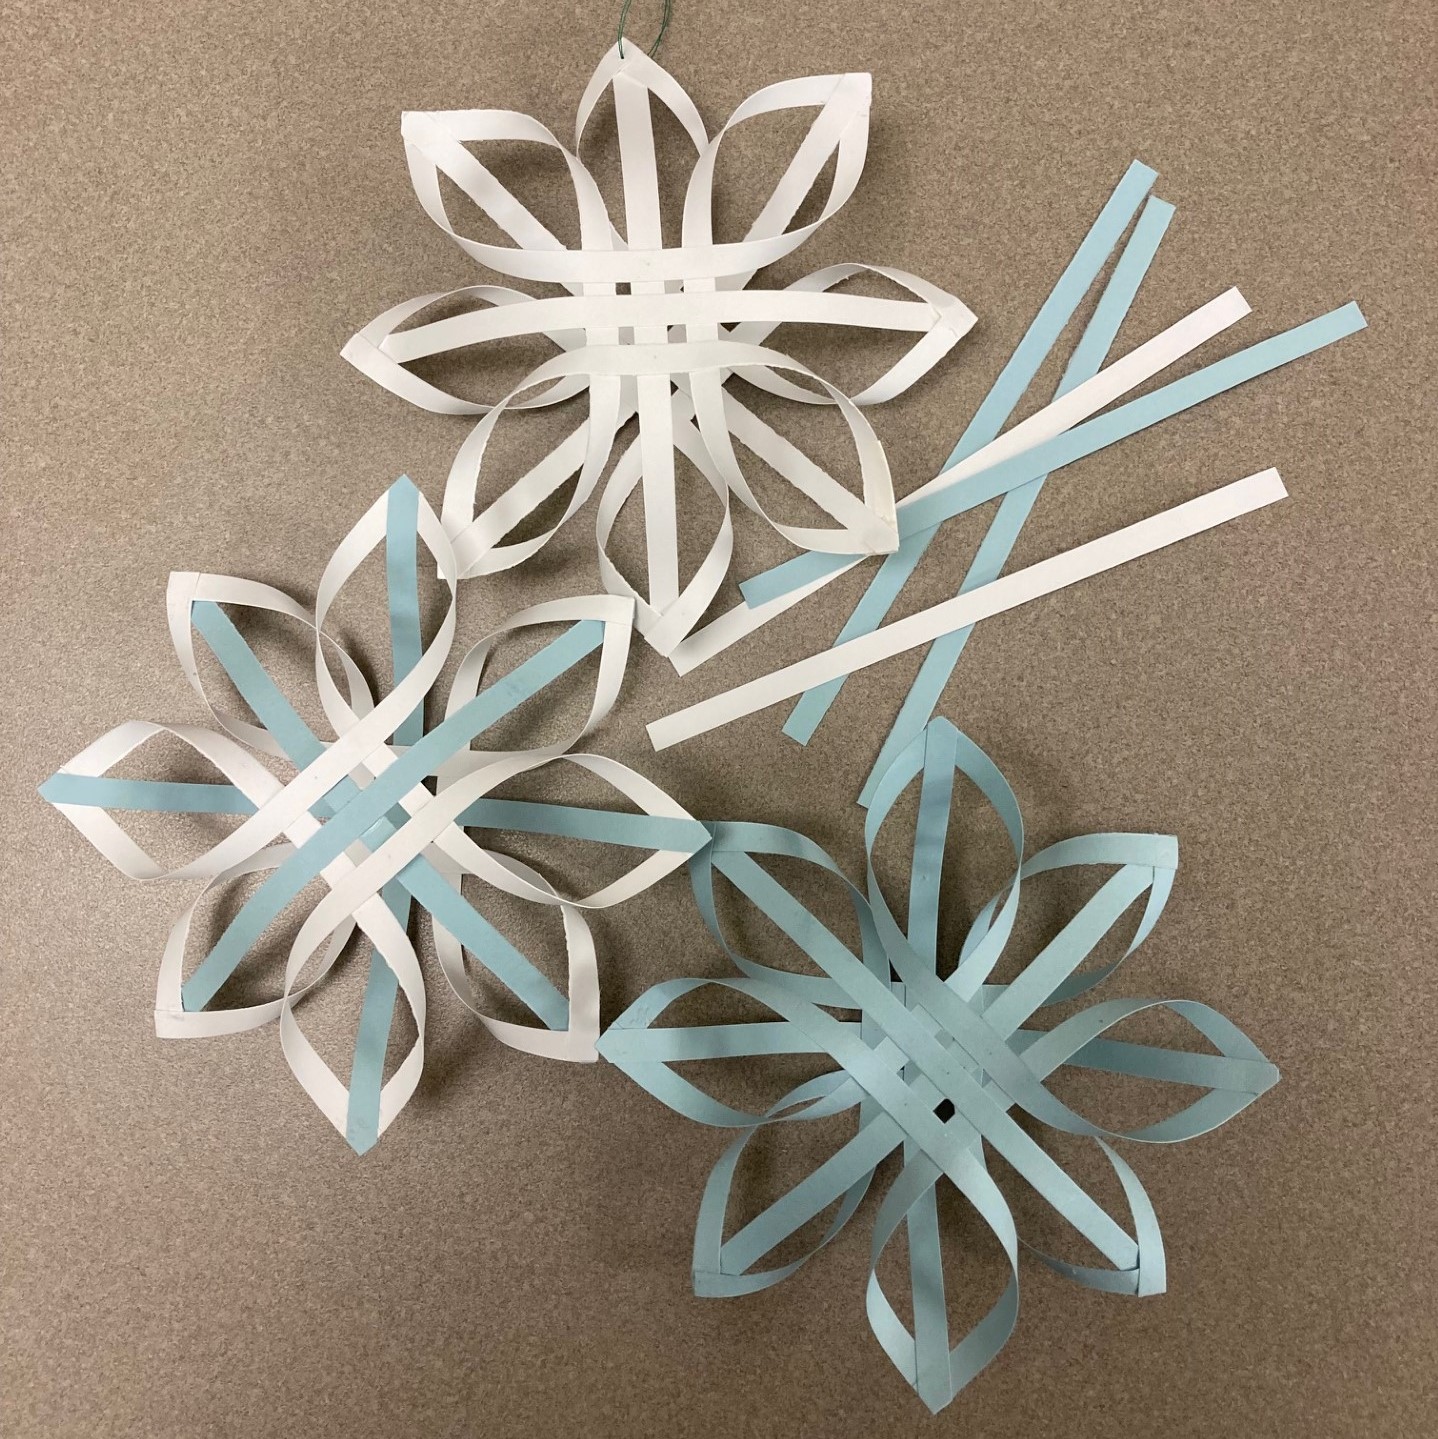 Woven paper star